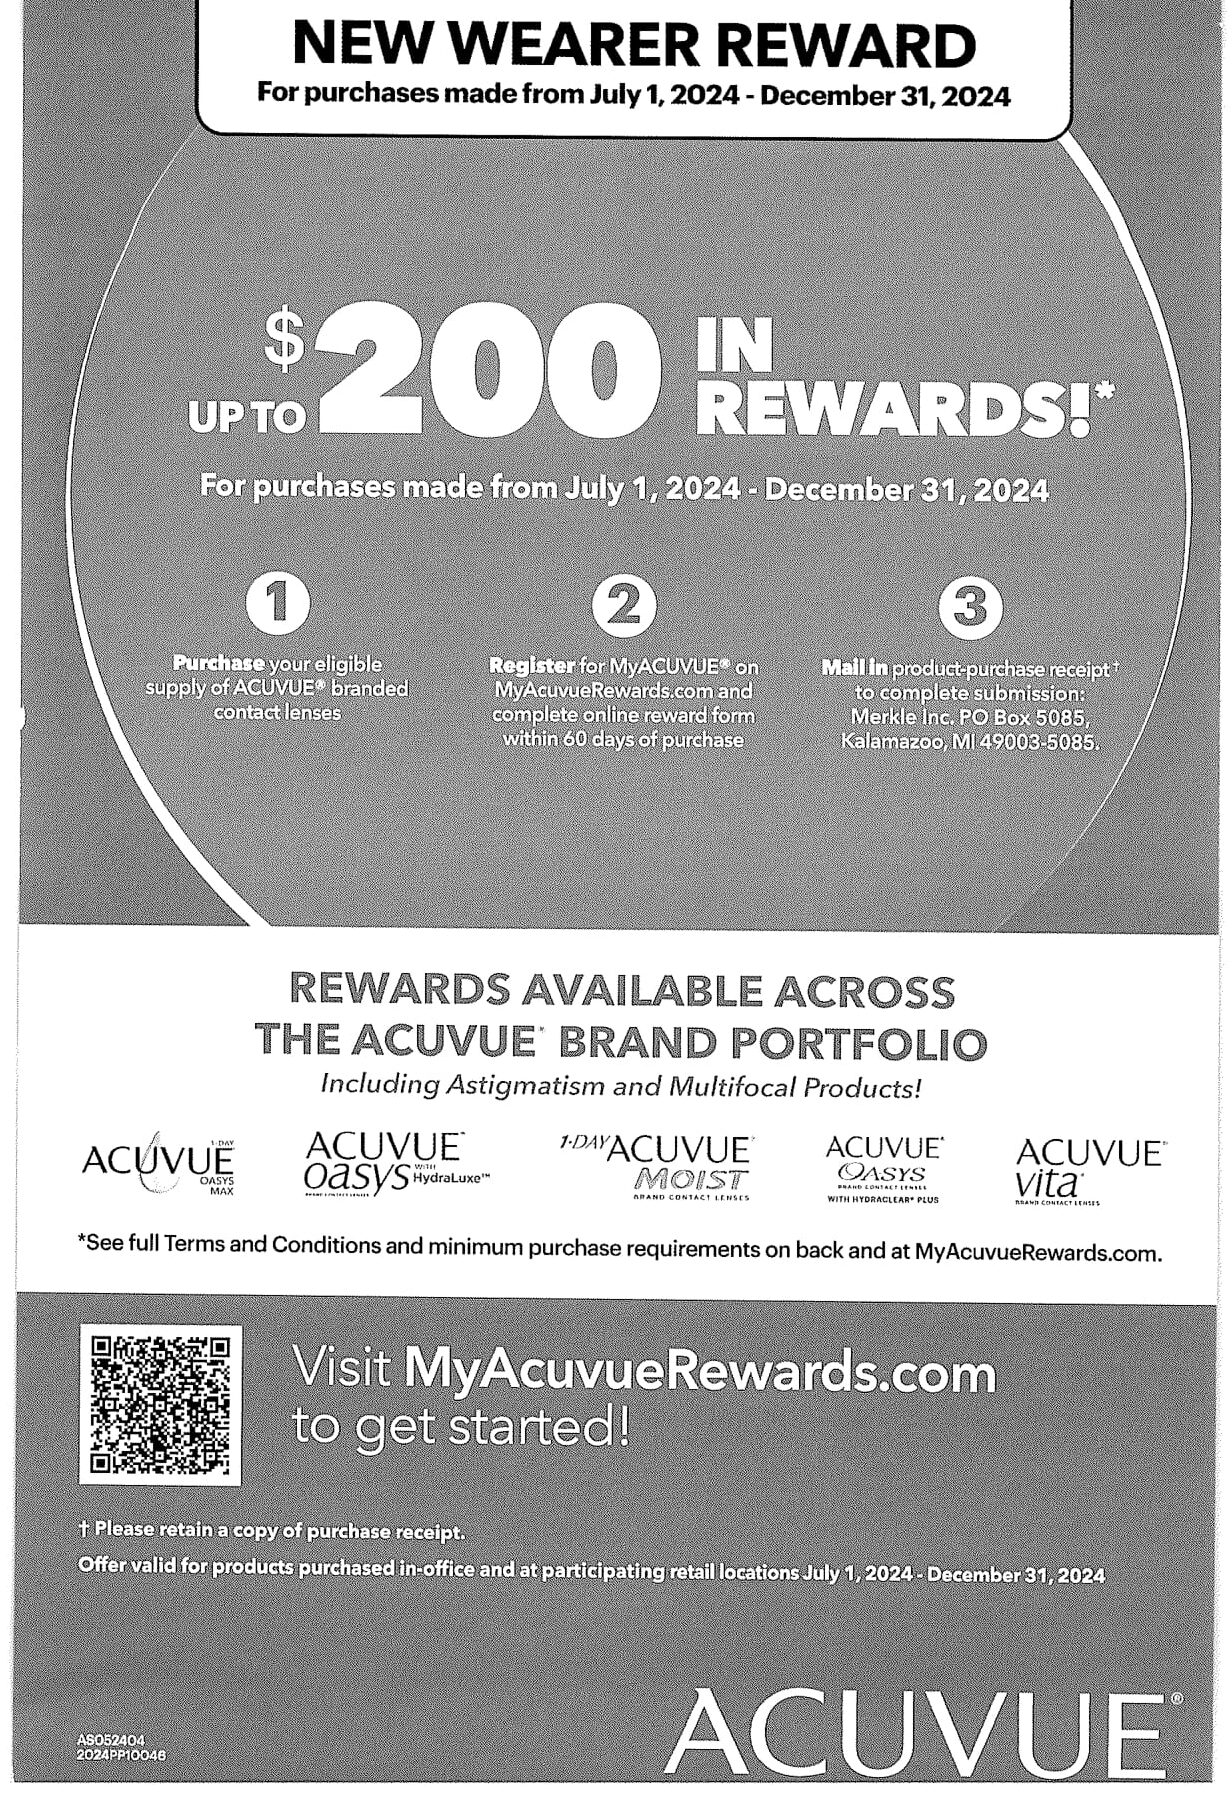 Acuvue New Wearer Front 7-1-24-1